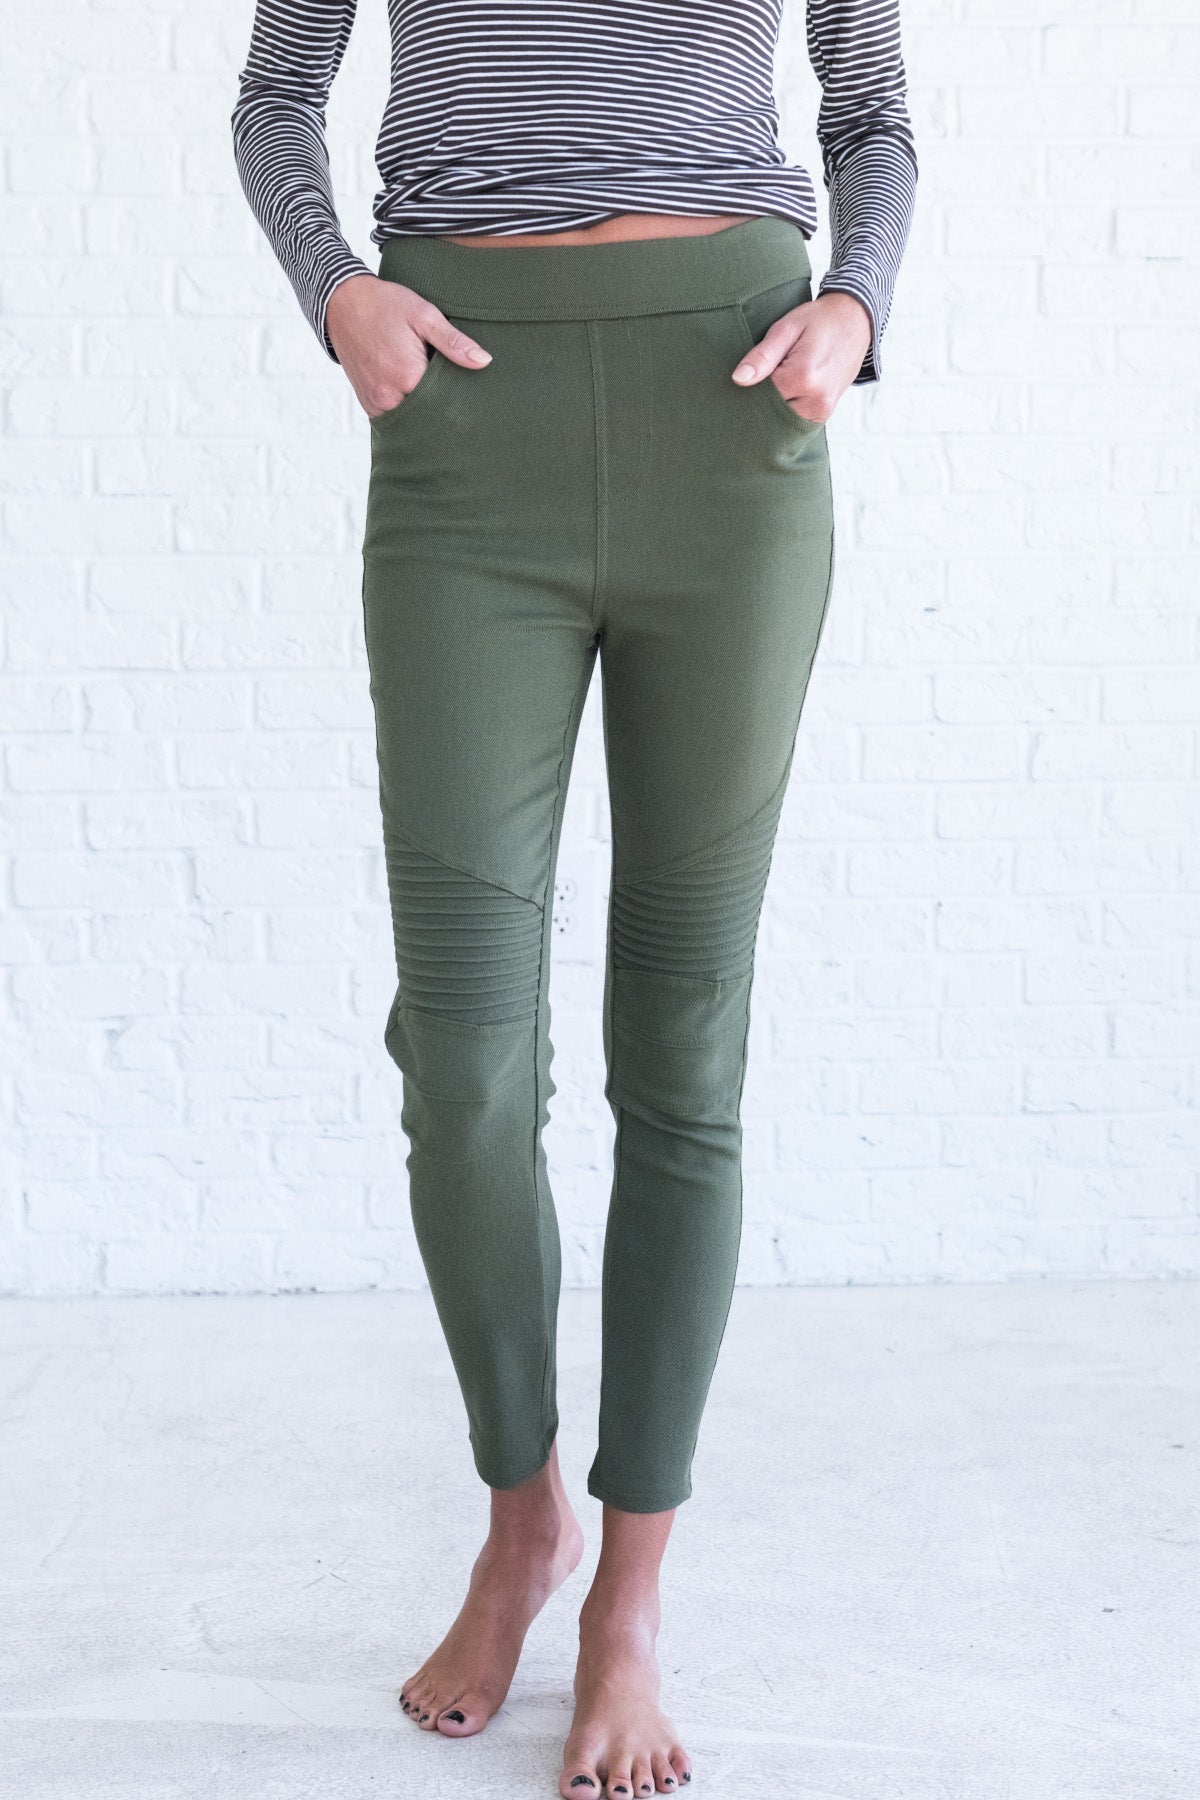 womens olive green jeggings